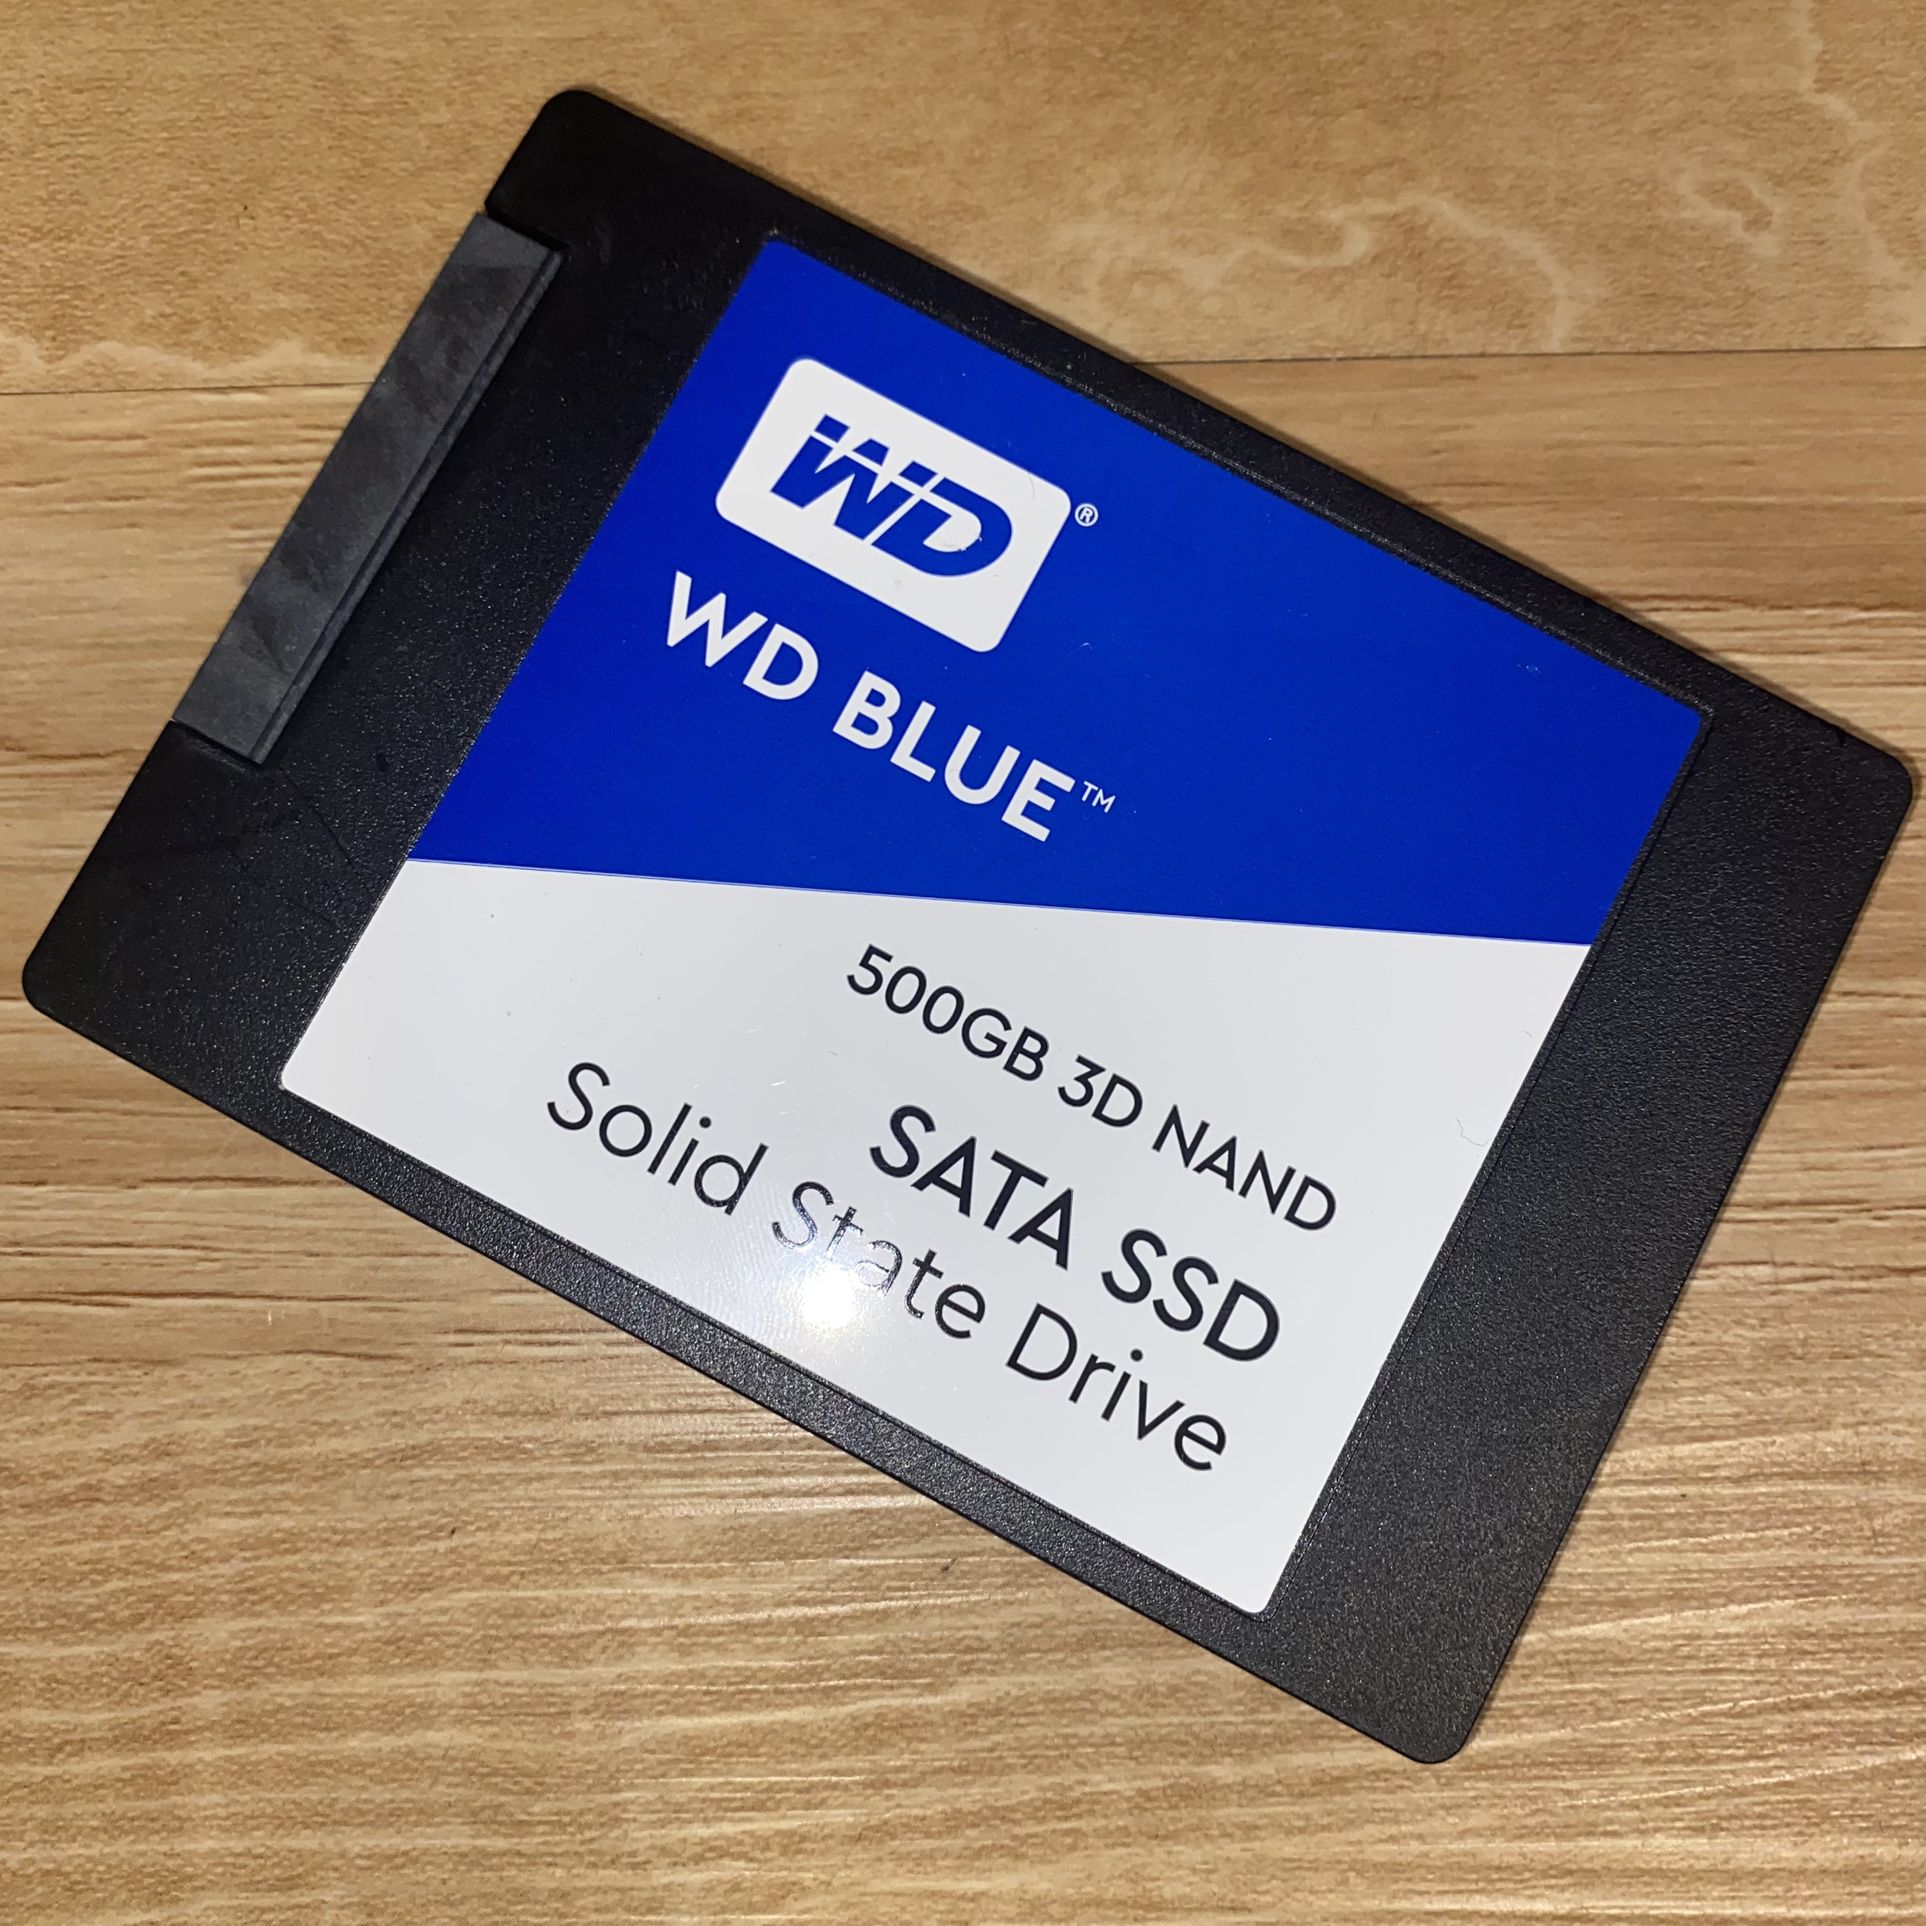 500GB SSD -Tested- WD Blue